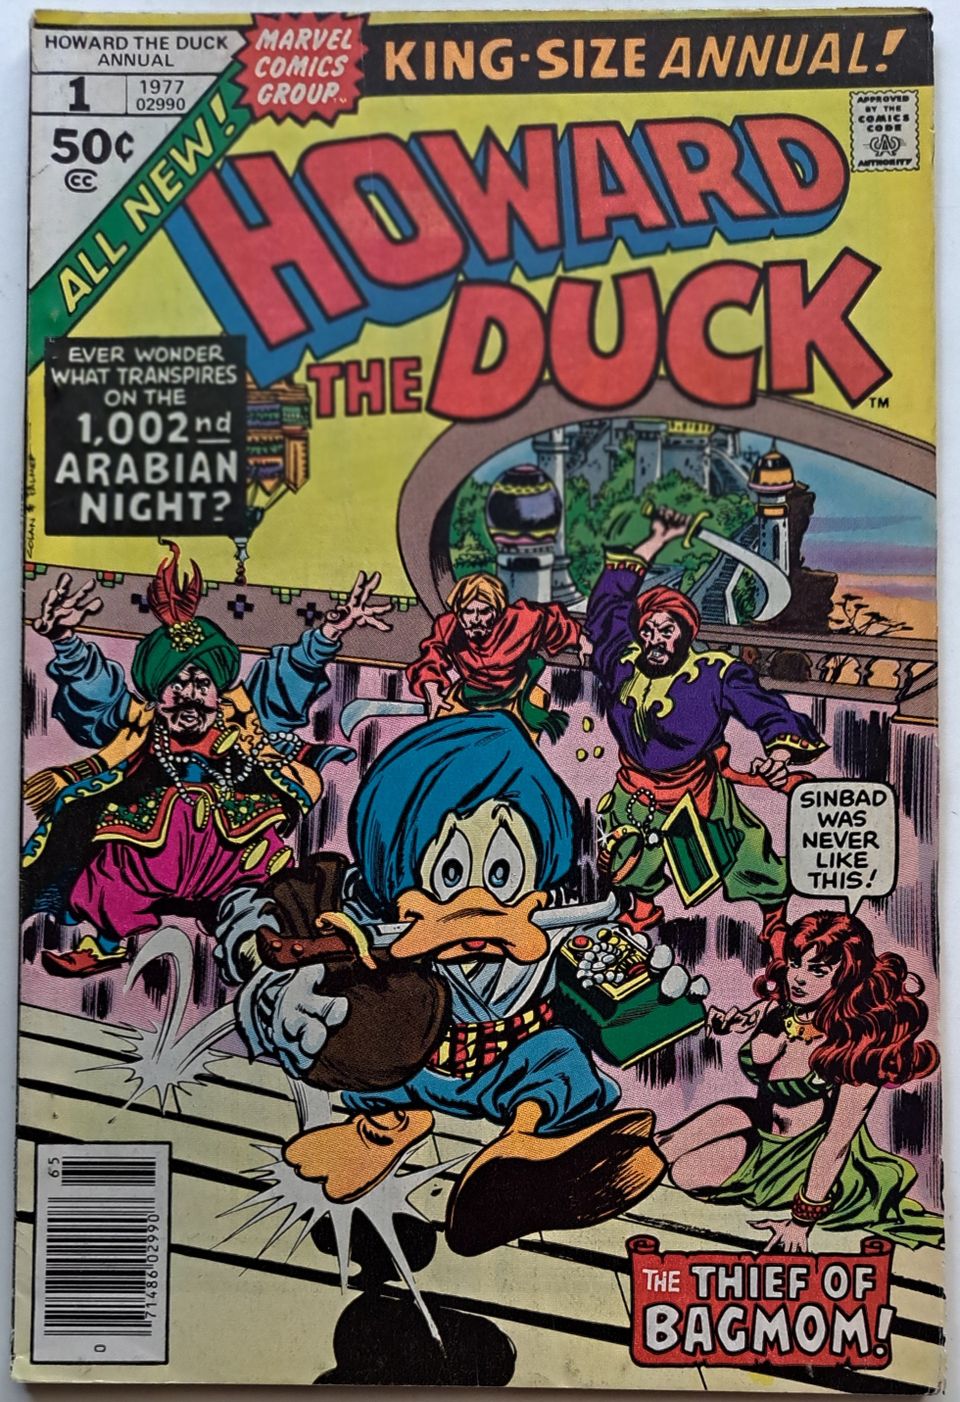 HOWARD THE DUCK 1 1977 King-Size annual